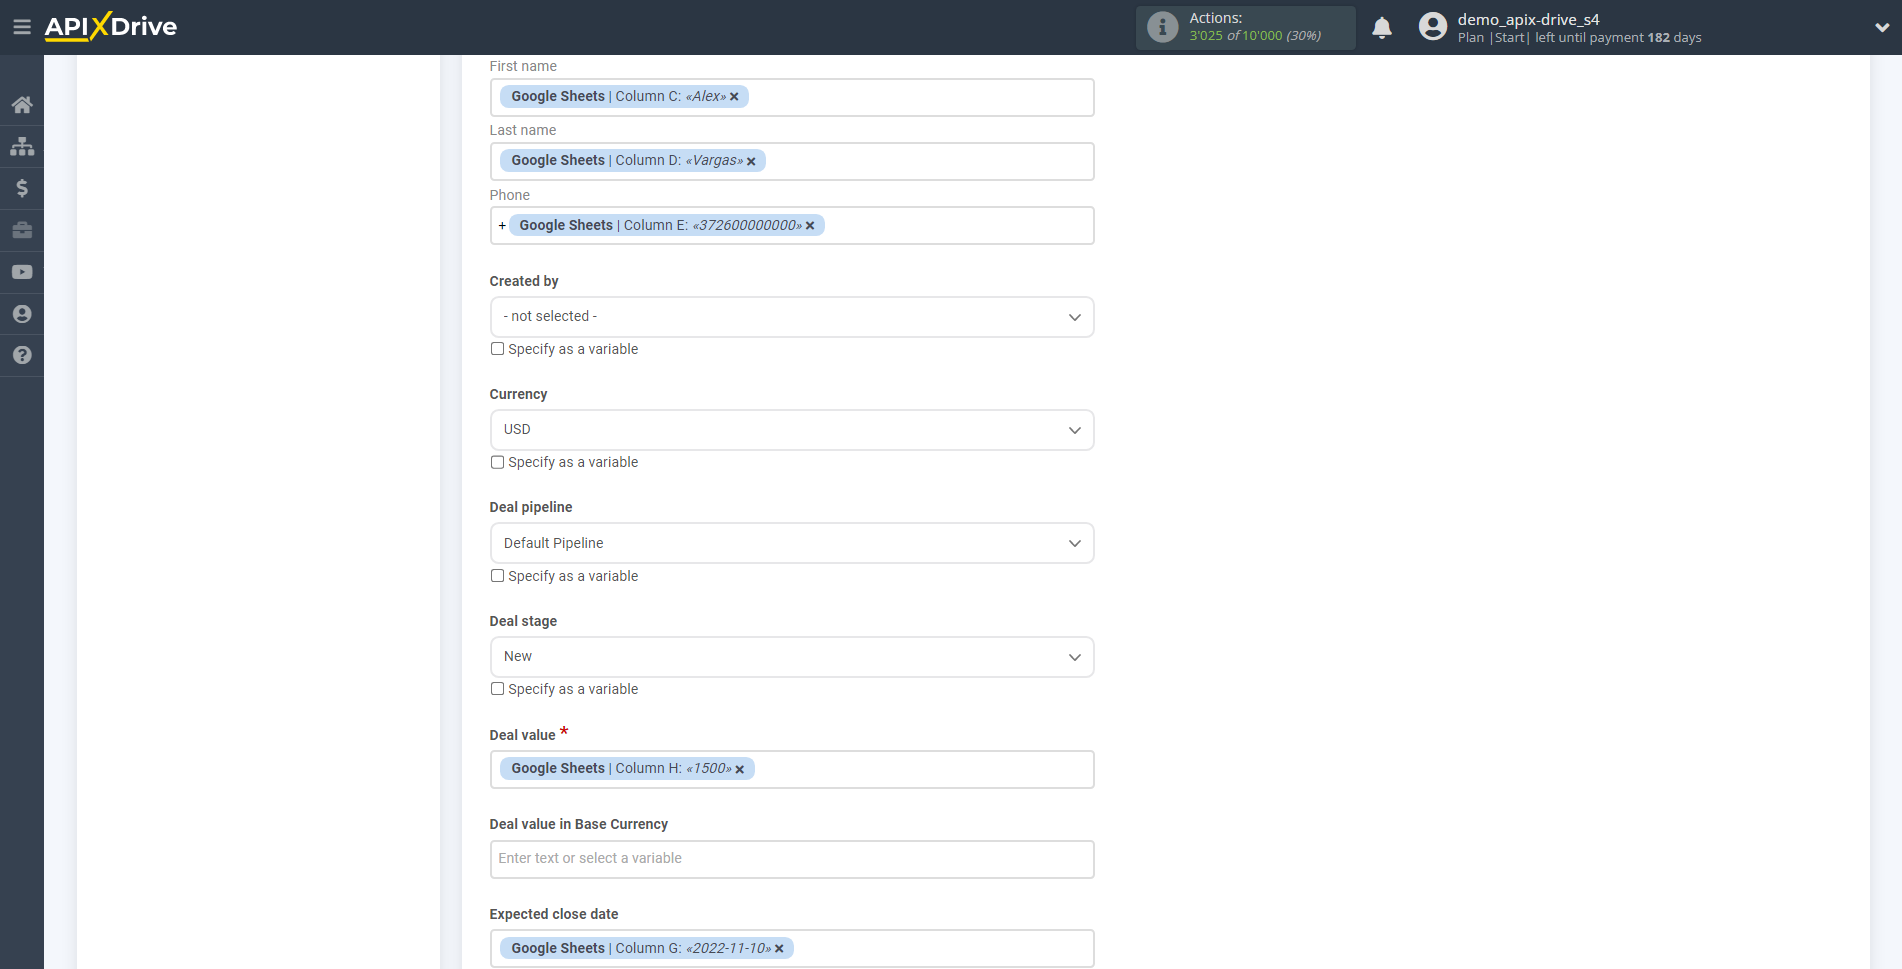 How to Connect Freshworks as Data Destination | Assigning Fields